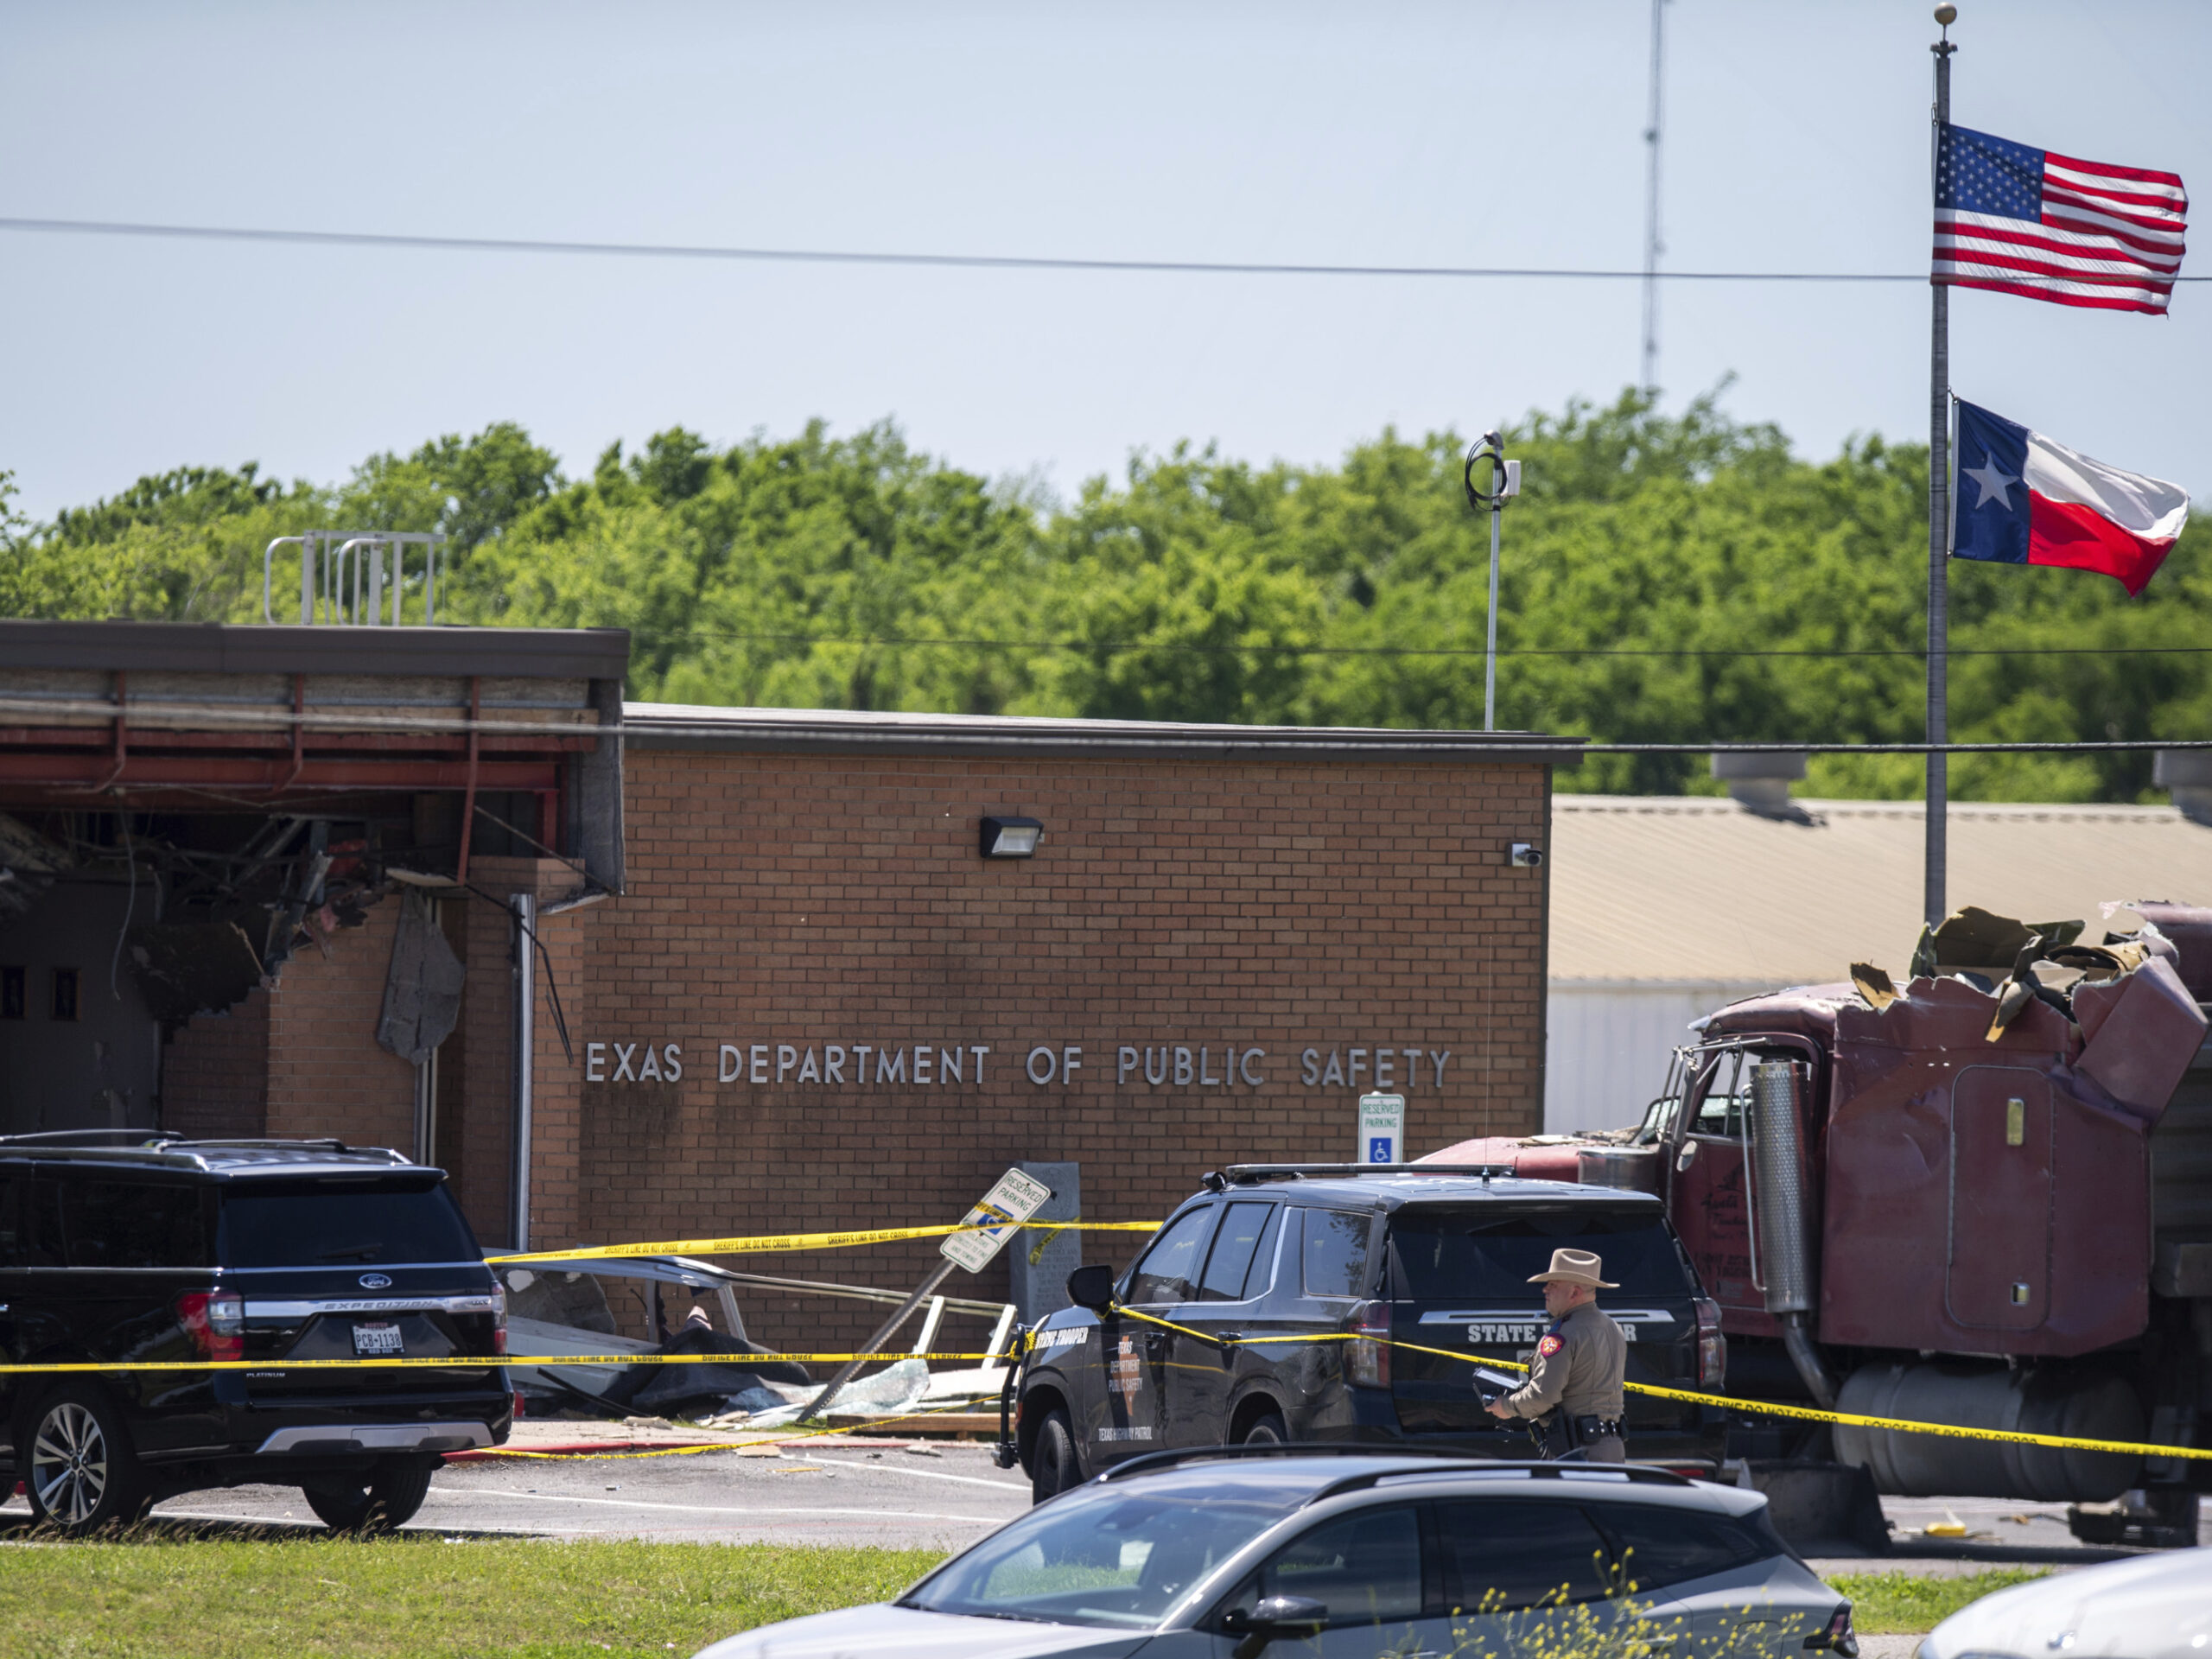 Law enforcement personnel work at the scene after a stolen 18-wheeler crashed into a Texas Department of Public Safety office on US-290 in Brenham, Texas on Friday.